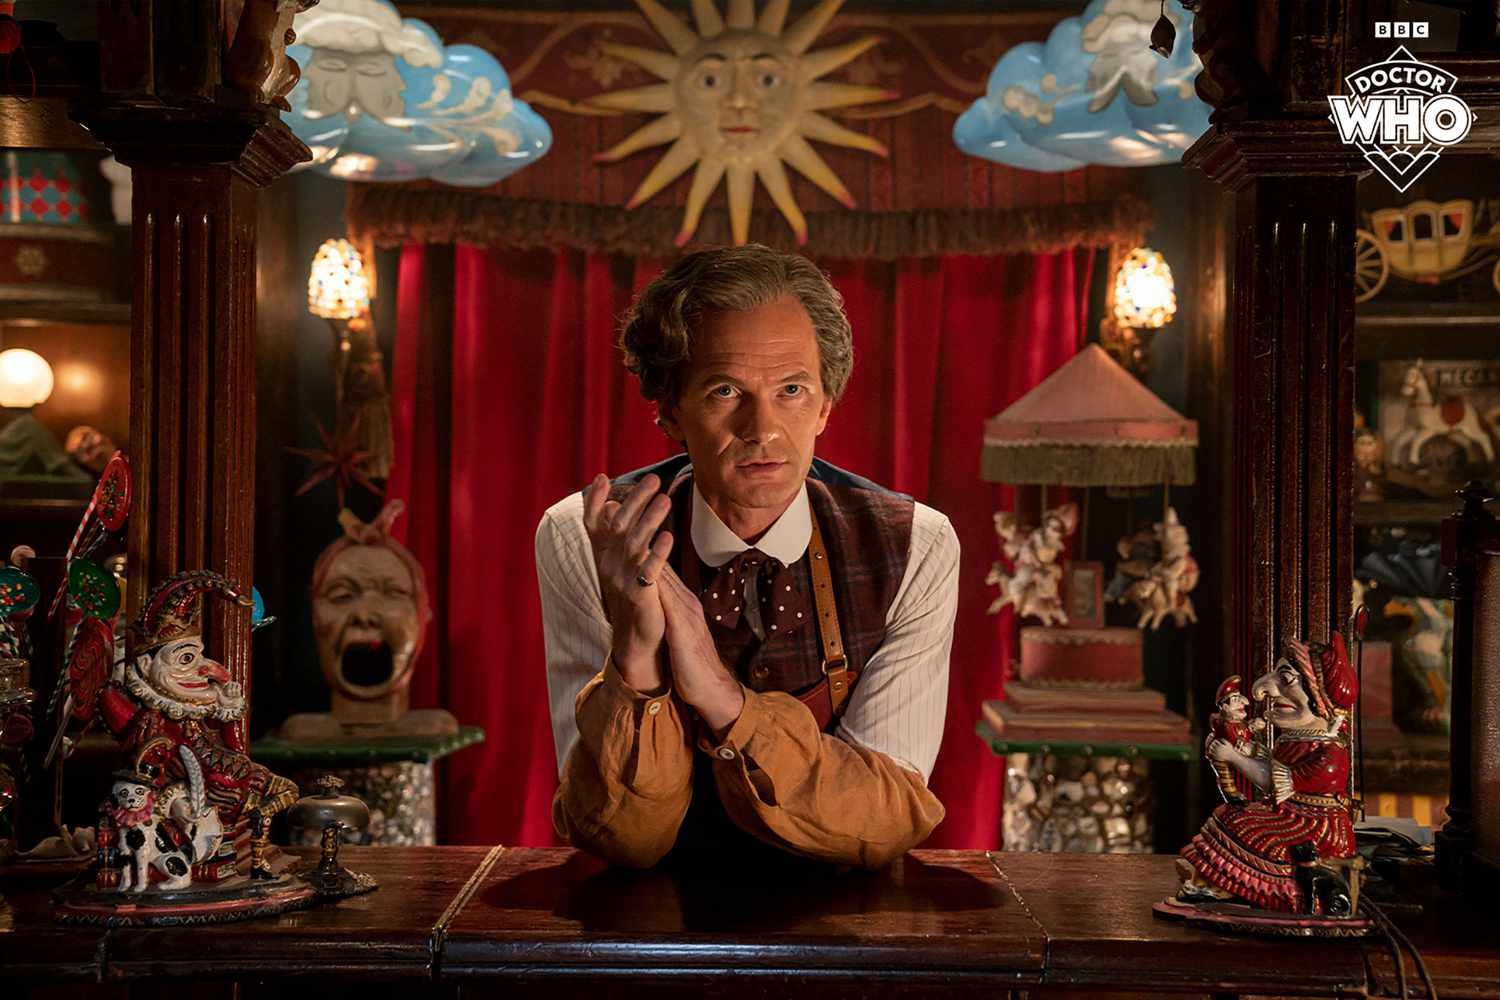 Neil Patrick Harris as Toymaker in Doctor Who 60th anniversary special